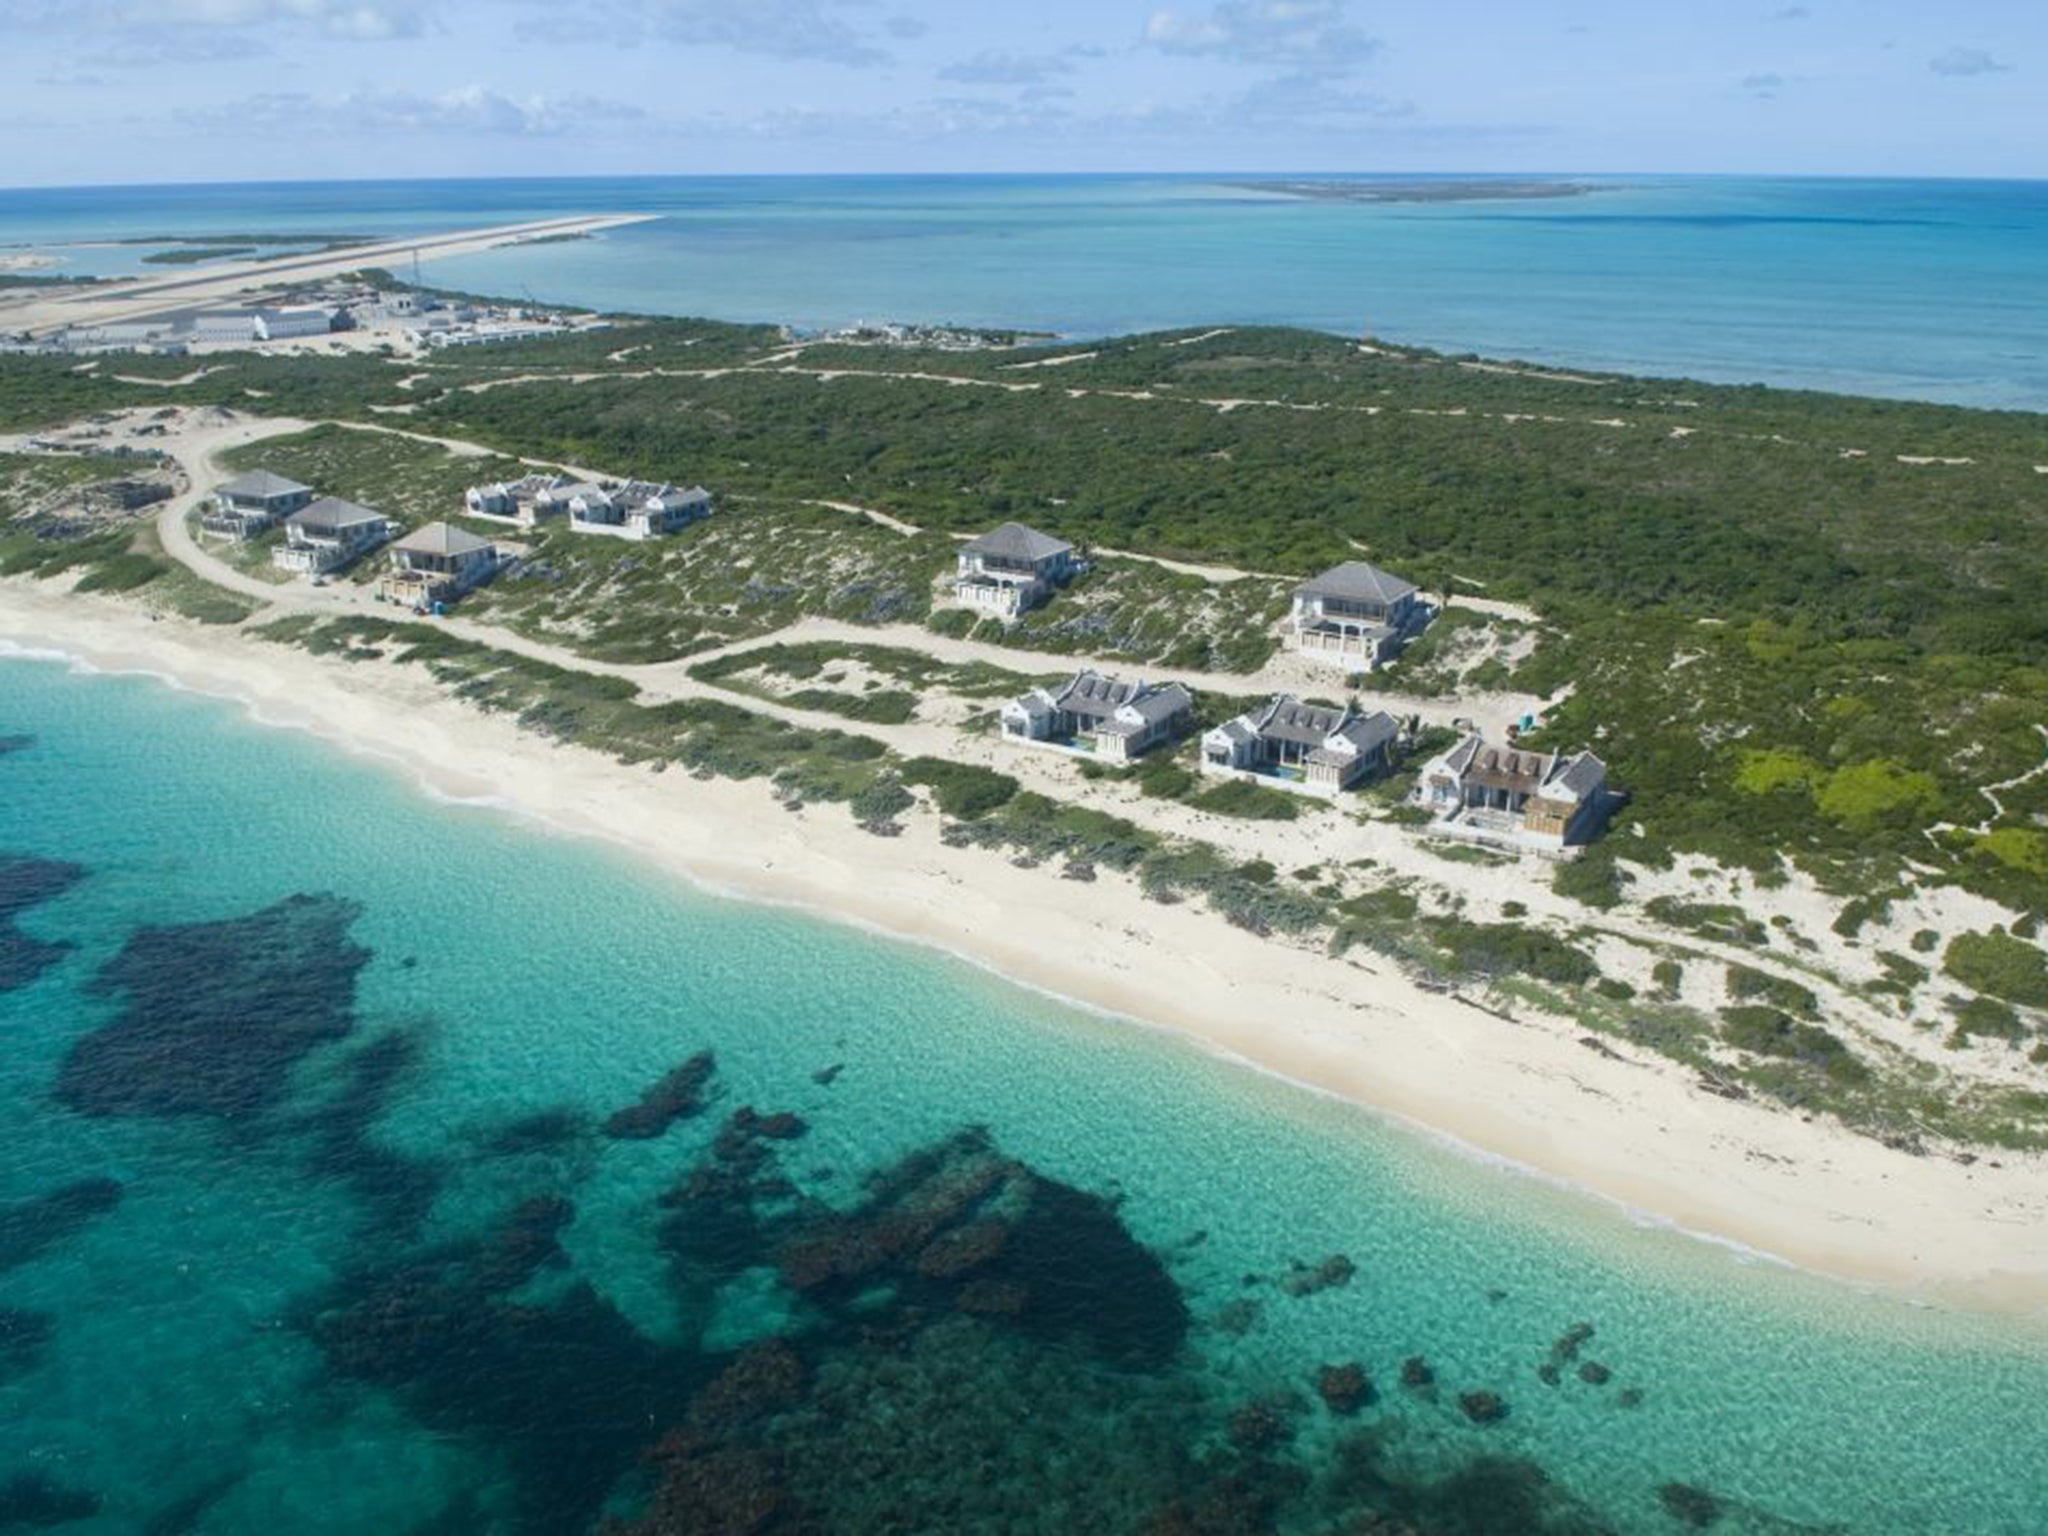 The Turks and Caicos; the islands have been convulsed by the corruption claims, with direct rule briefly imposed by the UK